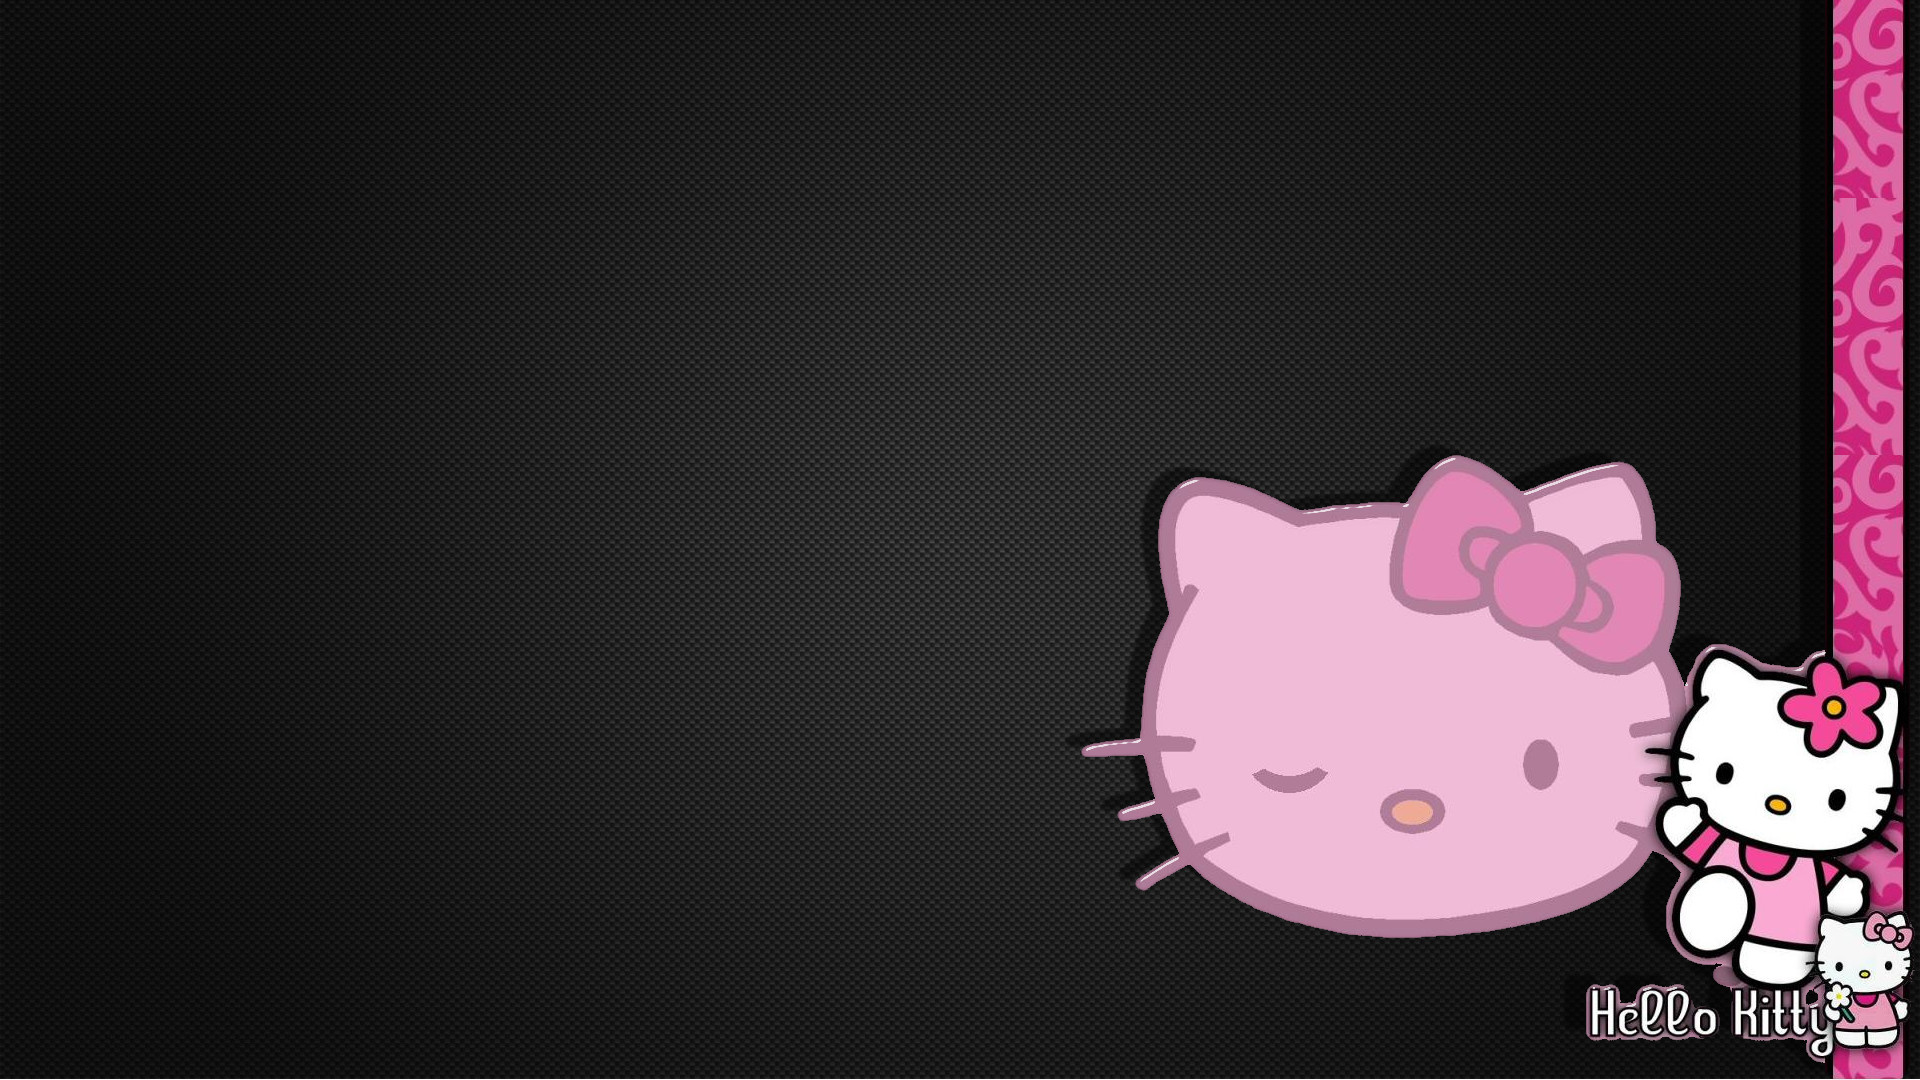 1920x1080 Hello Kitty Online images hello kitty HD wallpaper and background photos